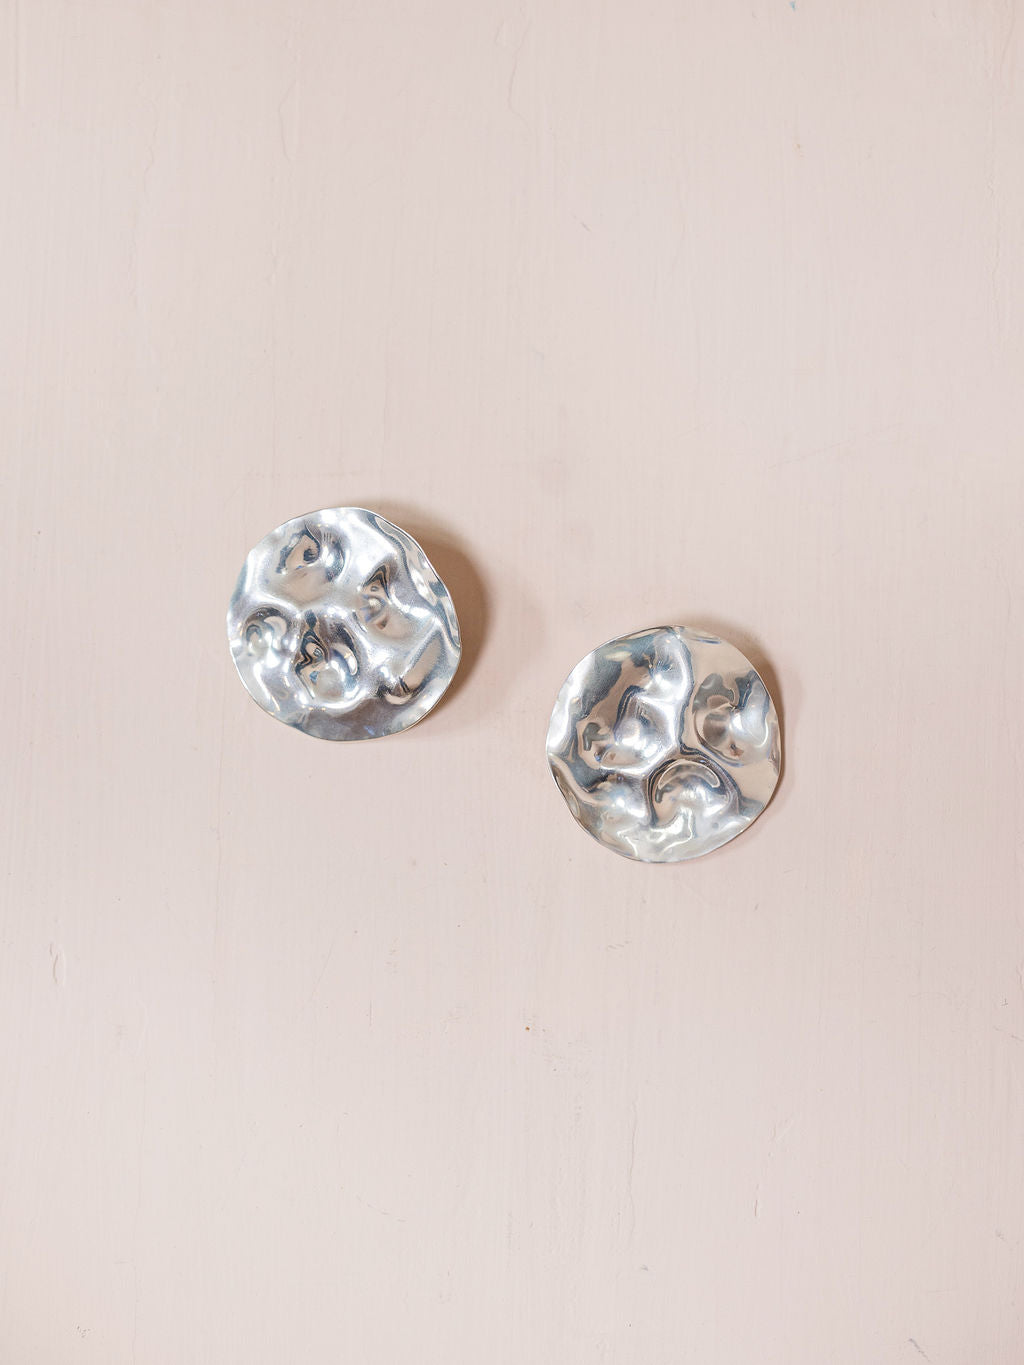 Textured silver disc earrings against pink background